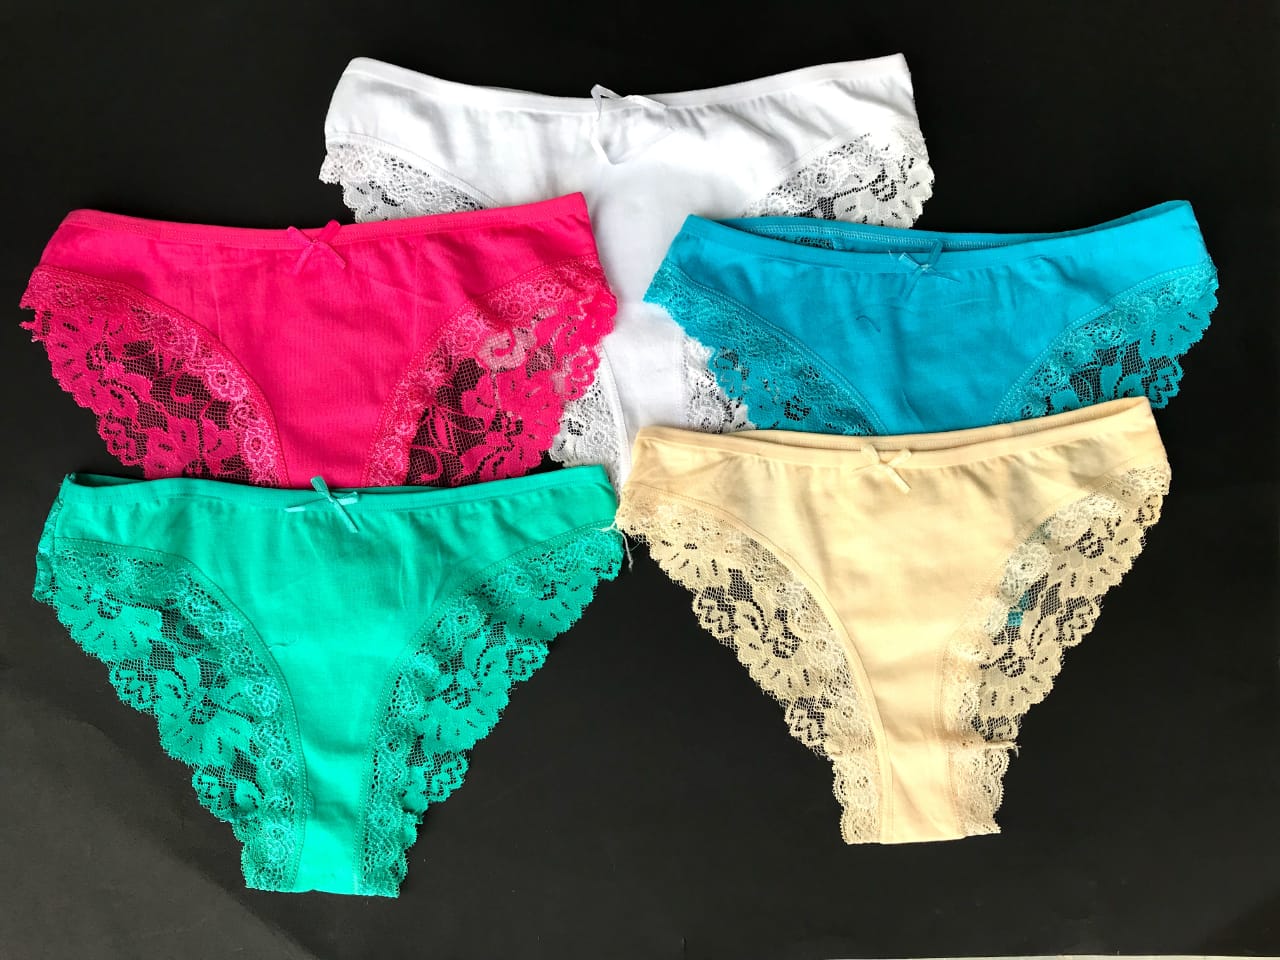 Pack of 5 Different Color Cotton & Net Panties – Comfy Nights